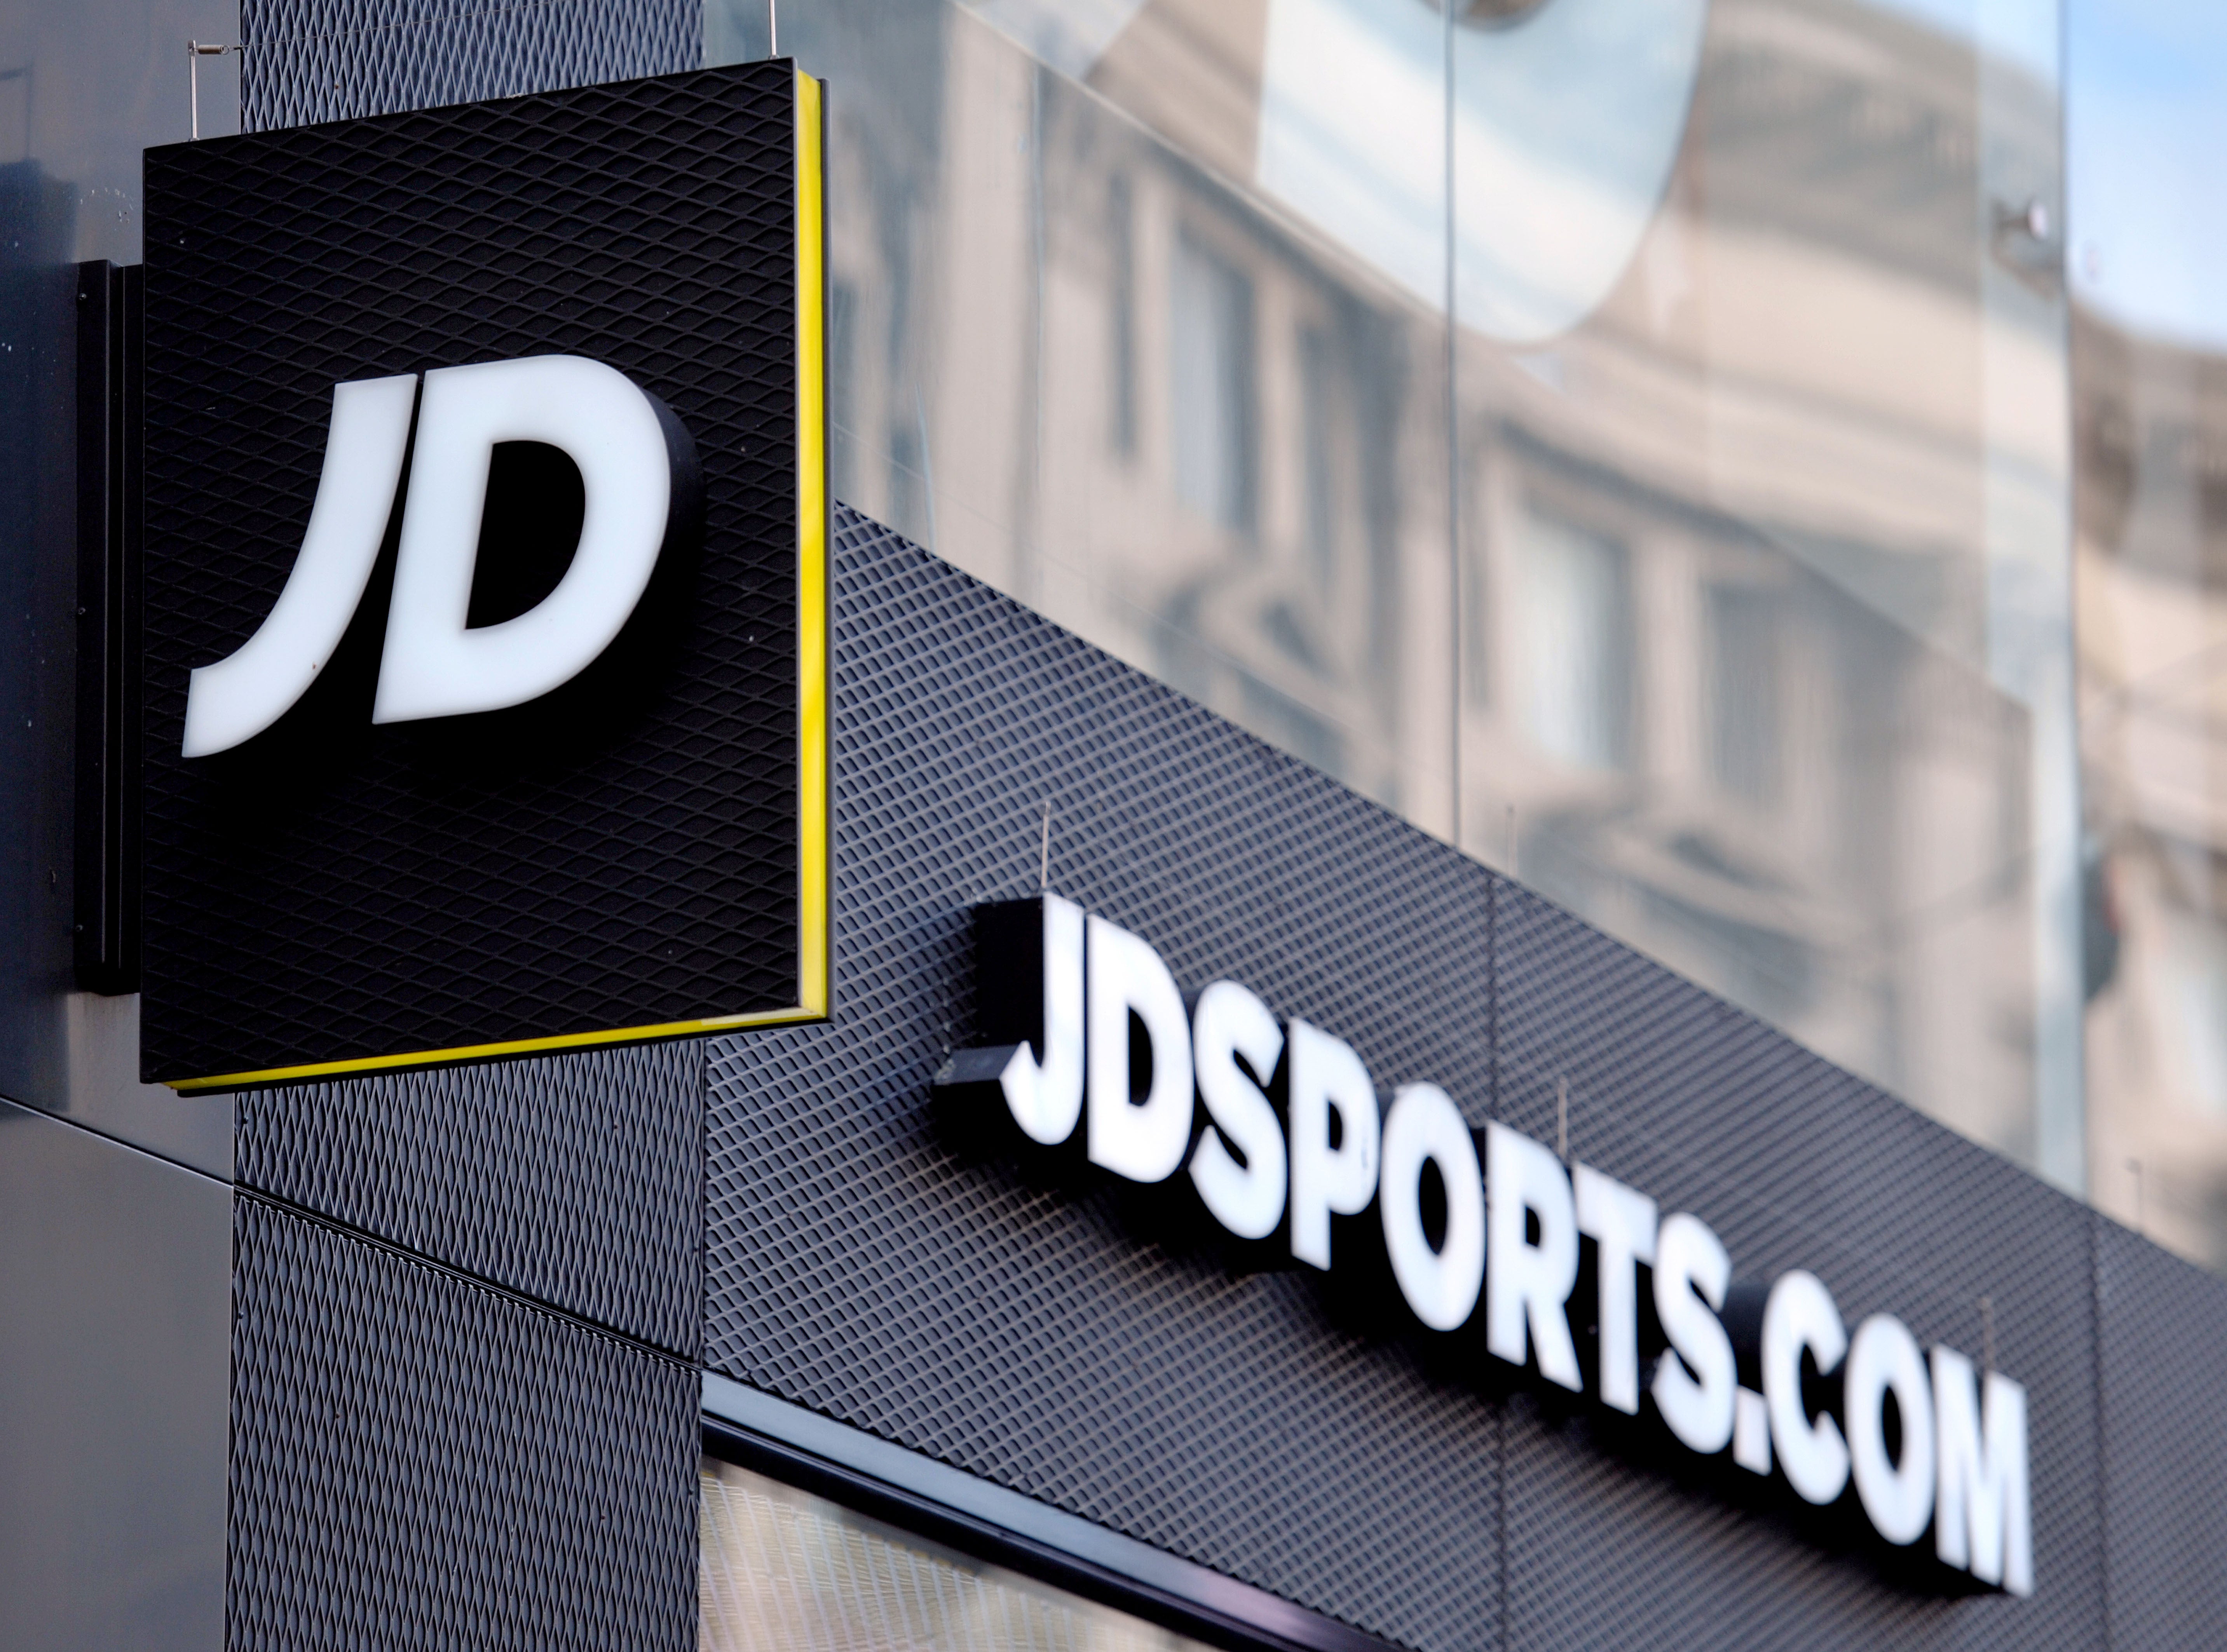 Scandal-hit retailer JD Sports has unveiled a record ?947.2m annual profit haul, but warned that earnings will remain flat in the current financial year amid the cost-of-living crisis (Nicholas.T Ansell/PA)